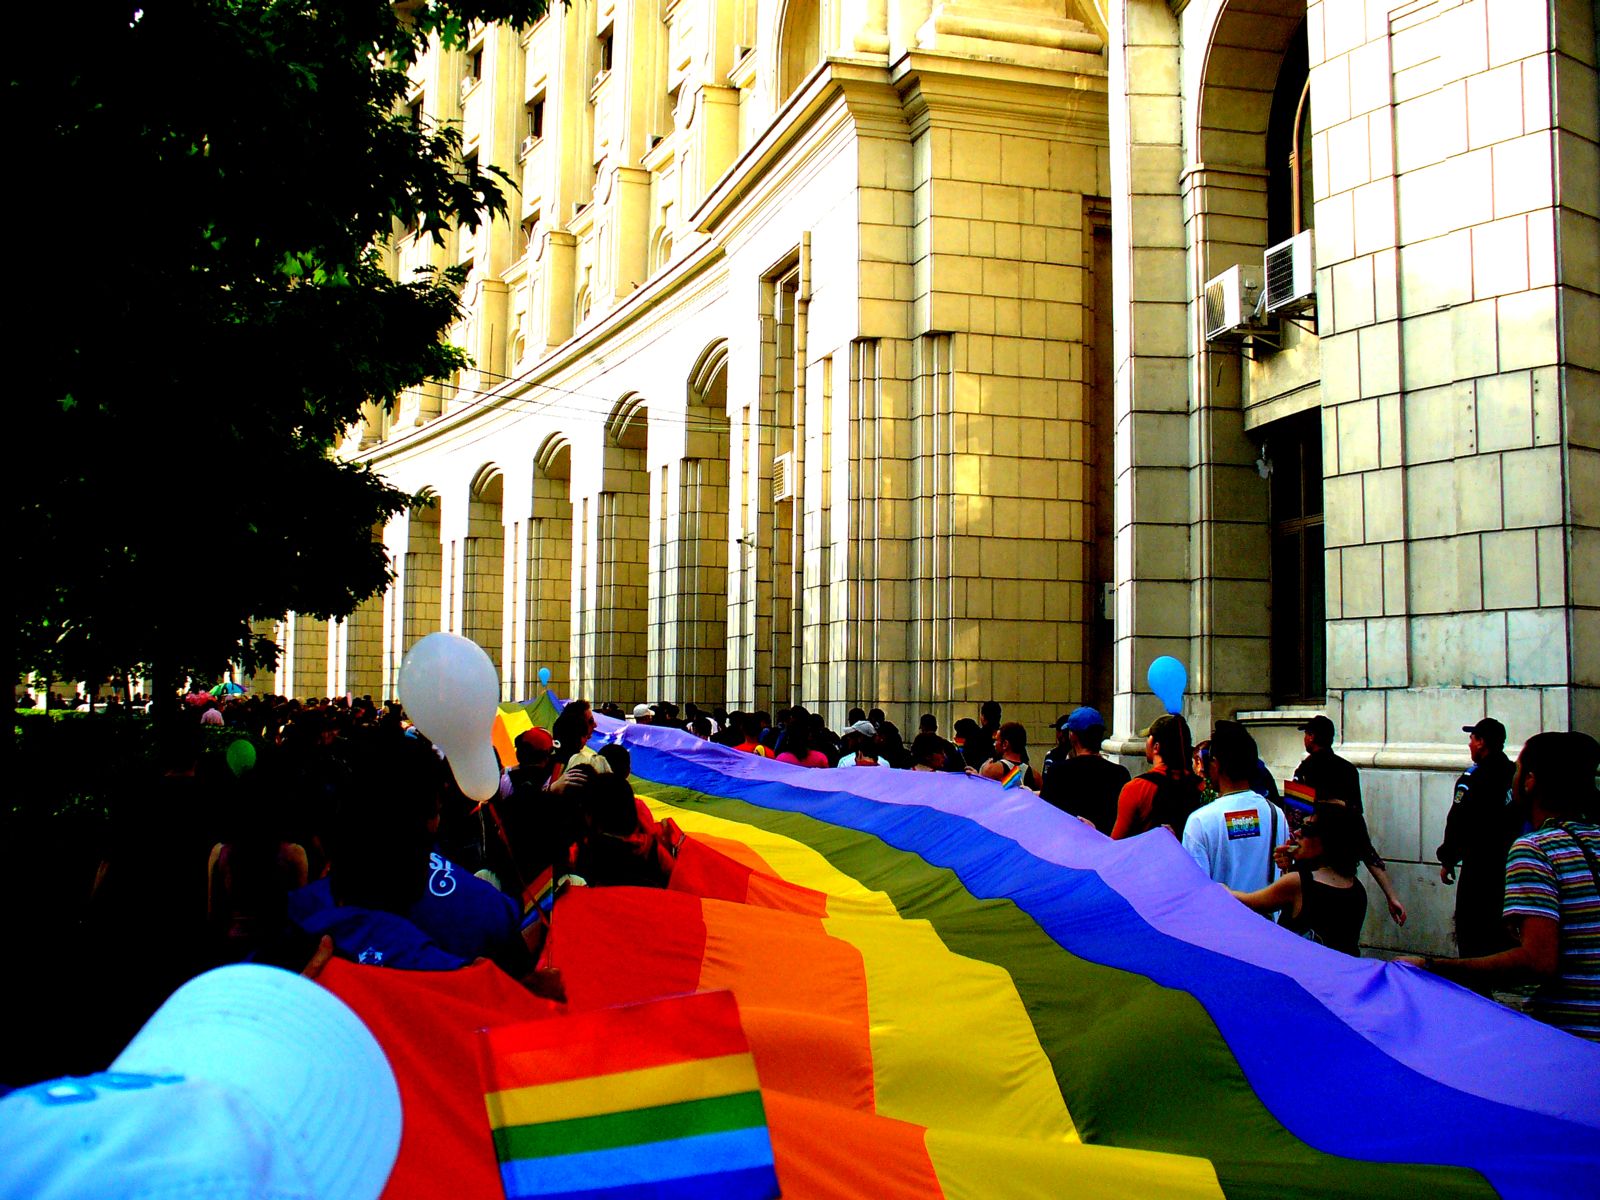 Landmark case from Romania expands possibilities for LGBT rights